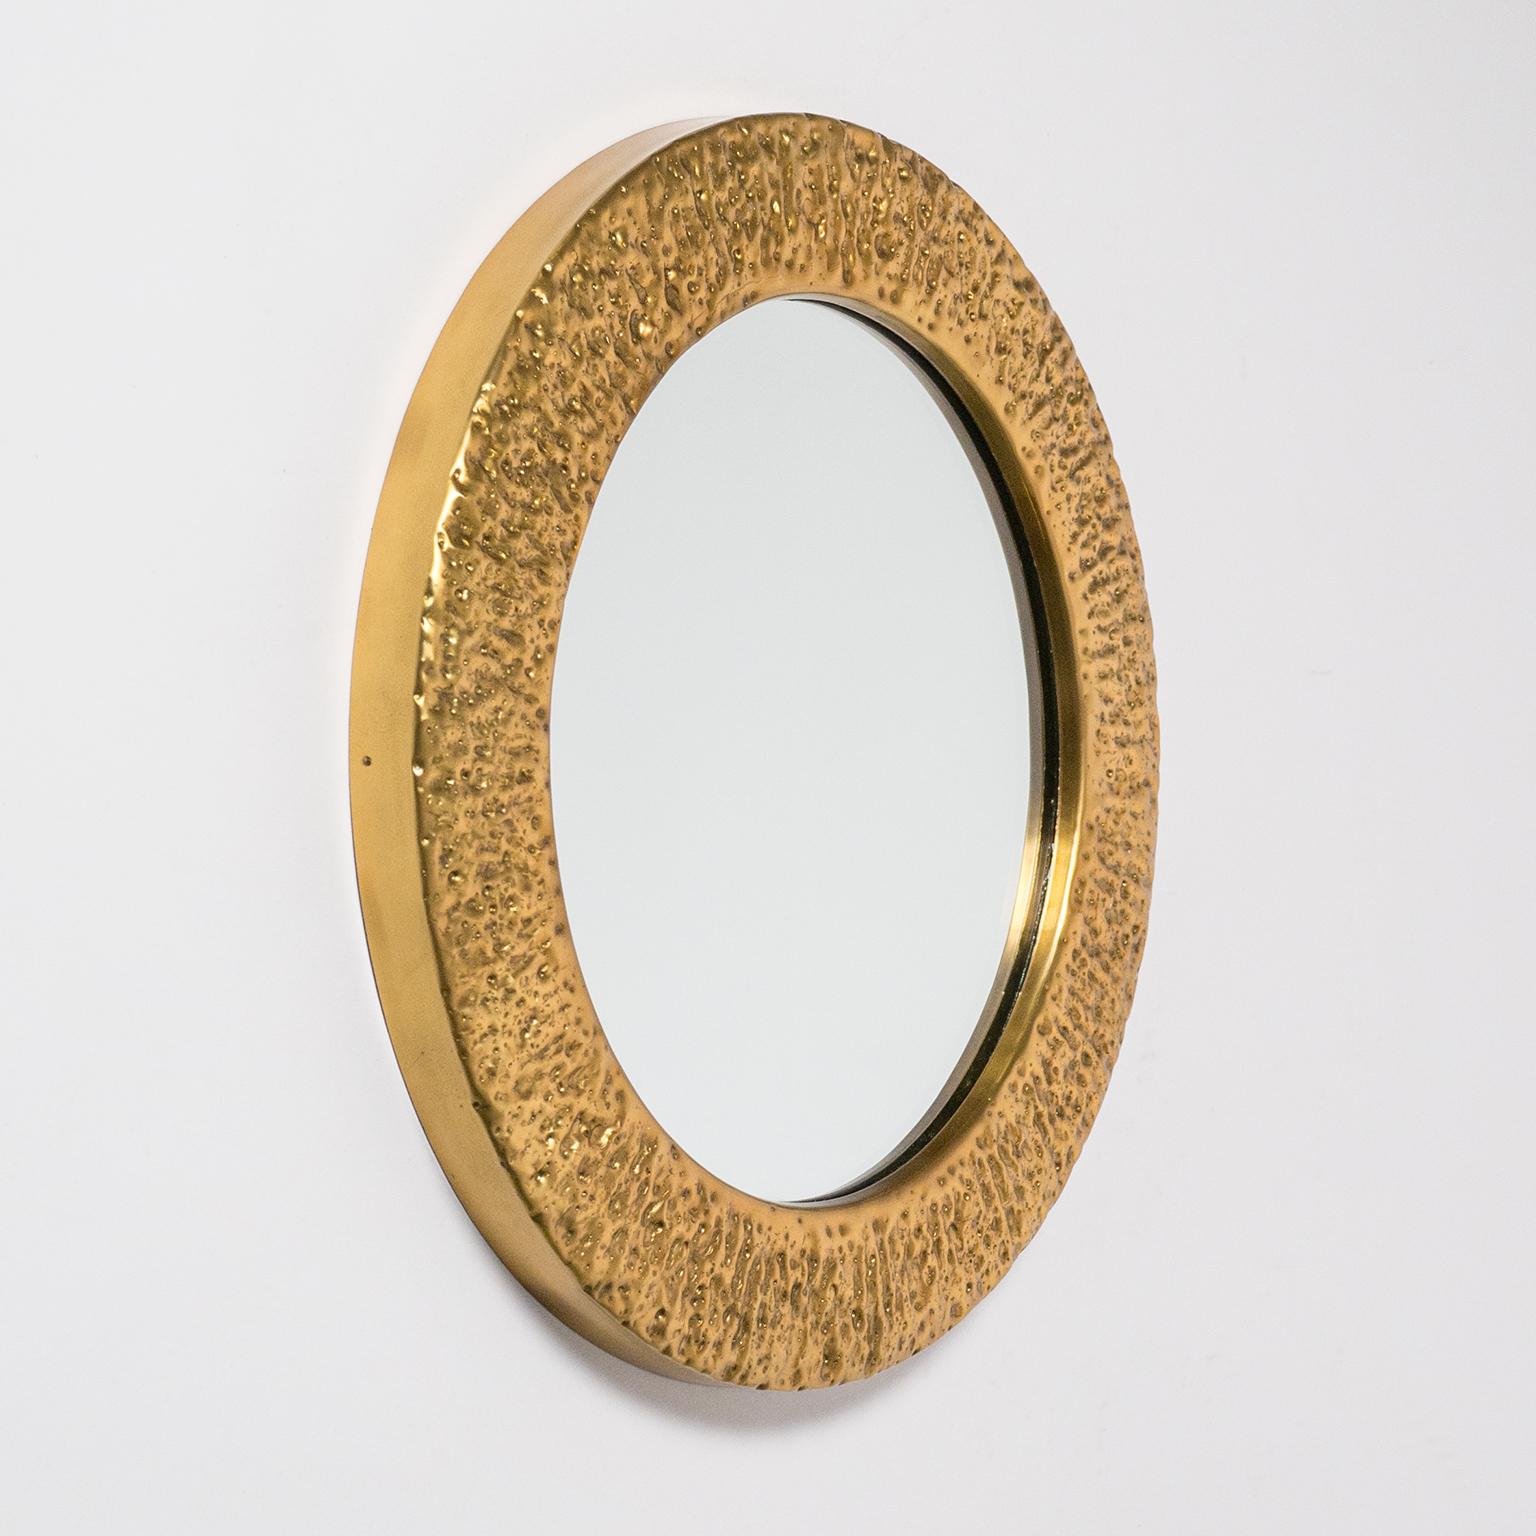 Rare hammered brass (possibly gilt) mirror from Germany, early 1960s. Hand worked, this is a unique piece with a rough and at the same time polished surface. Depending on light conditions and angle the brass frame will change its appearance. Very